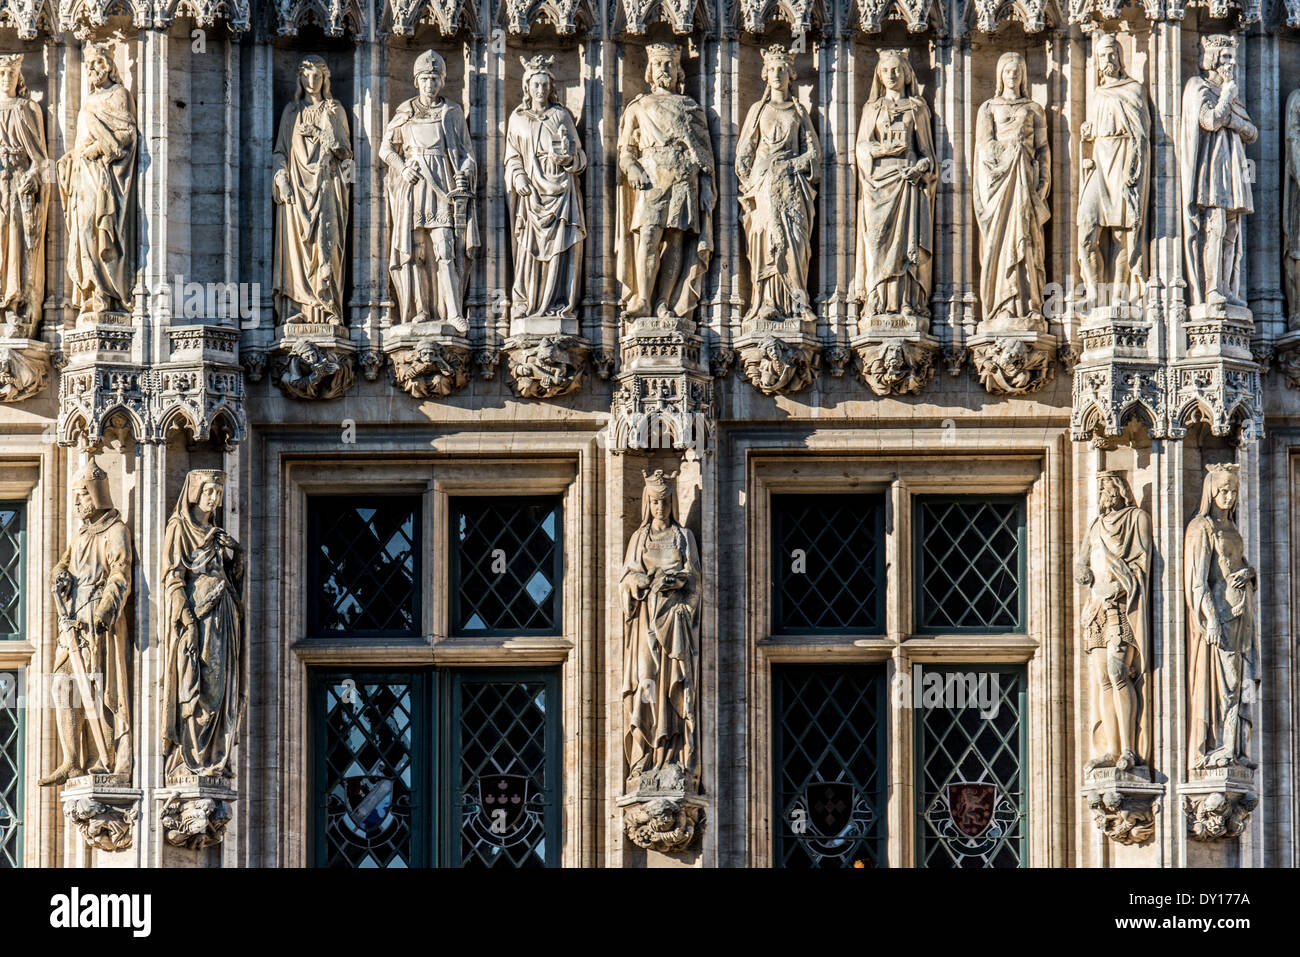 Detail of the ornate statues on the exterior of the Brussels City Hall on Grand Place (La Grand-Place), a UNESCO World Heritage Site in central Brussels, Belgium. Lined with ornate, historic buildings, the cobblestone square is the primary tourist attraction in Brussels. Stock Photo